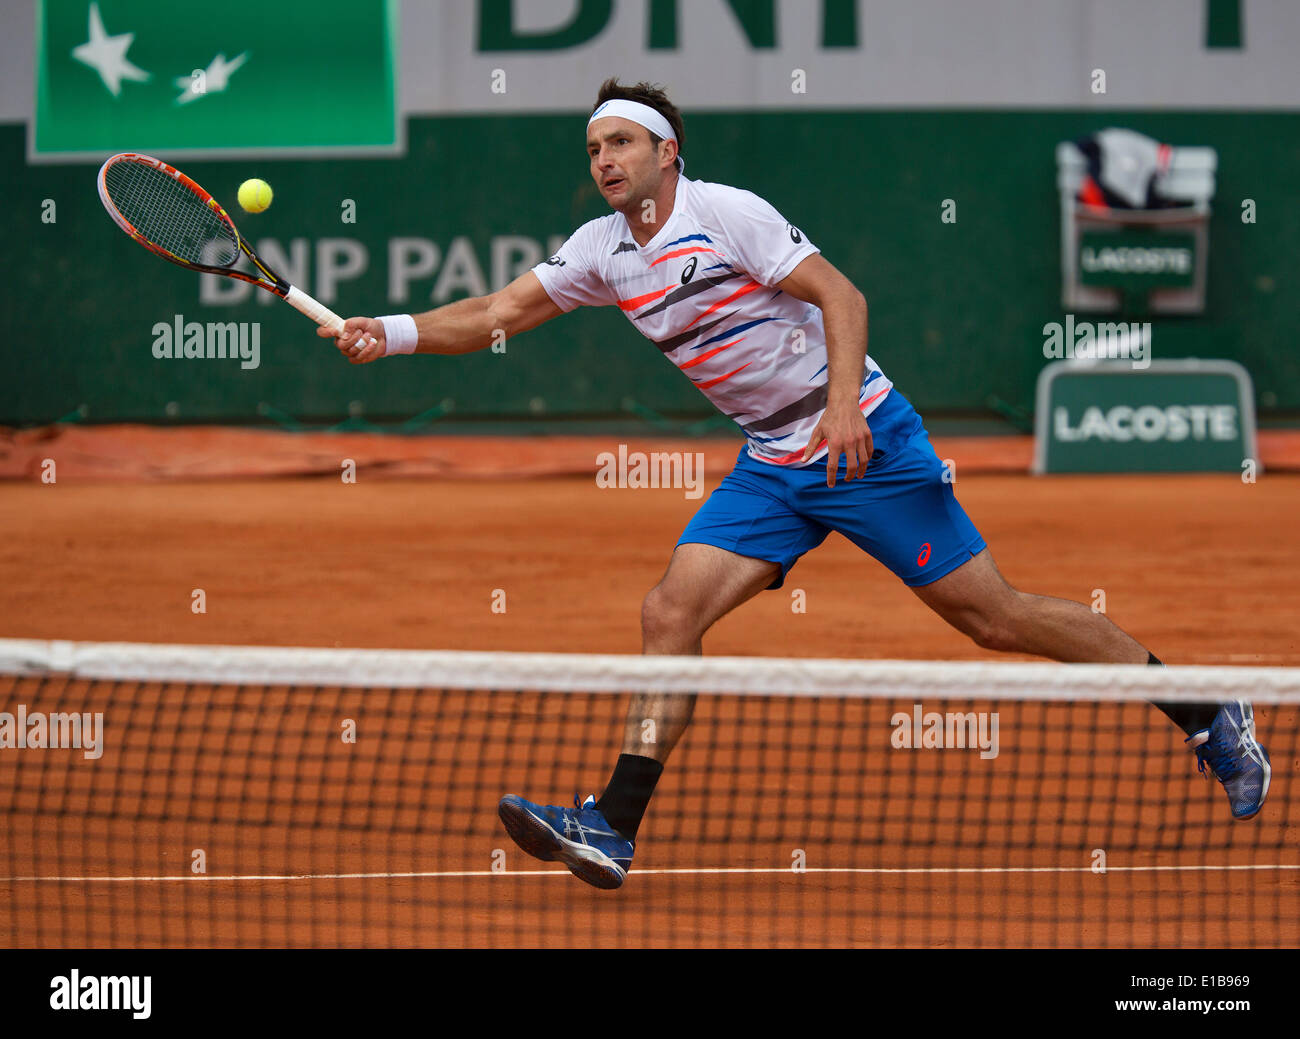 Paris, France. 28th May 2014. Tennis, French Open, Roland Garros, Marinko Matosevic (AUS) in his match against Andy Murray (GBR) Photo:Tennisimages/Henk Koster/Alamy Live News Stock Photo